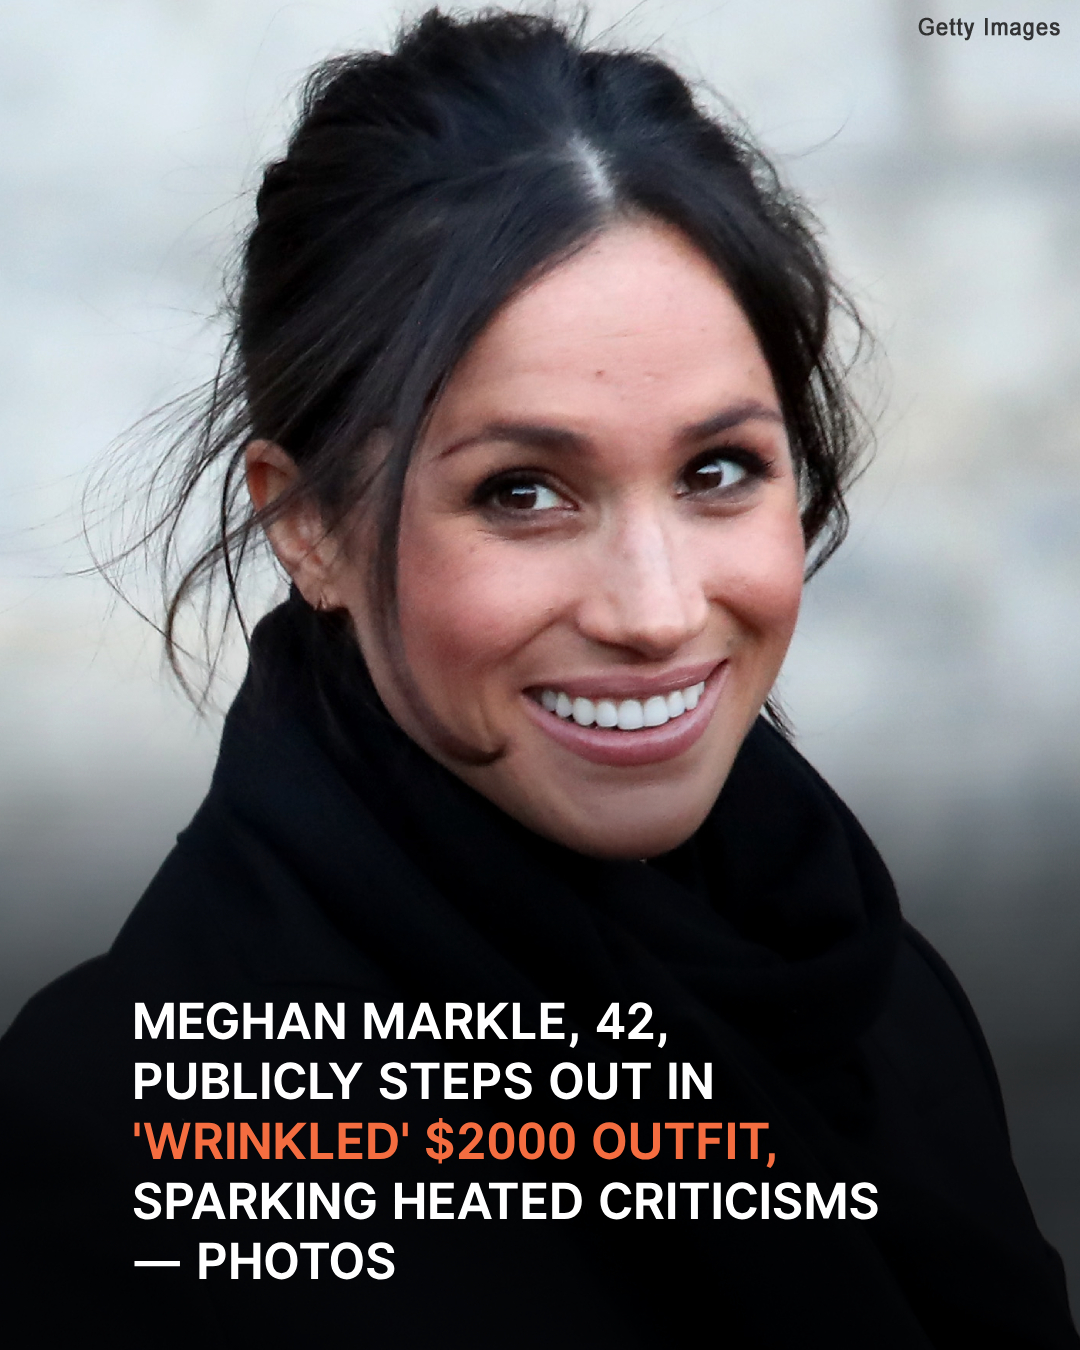 Meghan Markle, 42, Makes a Public Appearance in 'Wrinkled' $2000 Suit ...